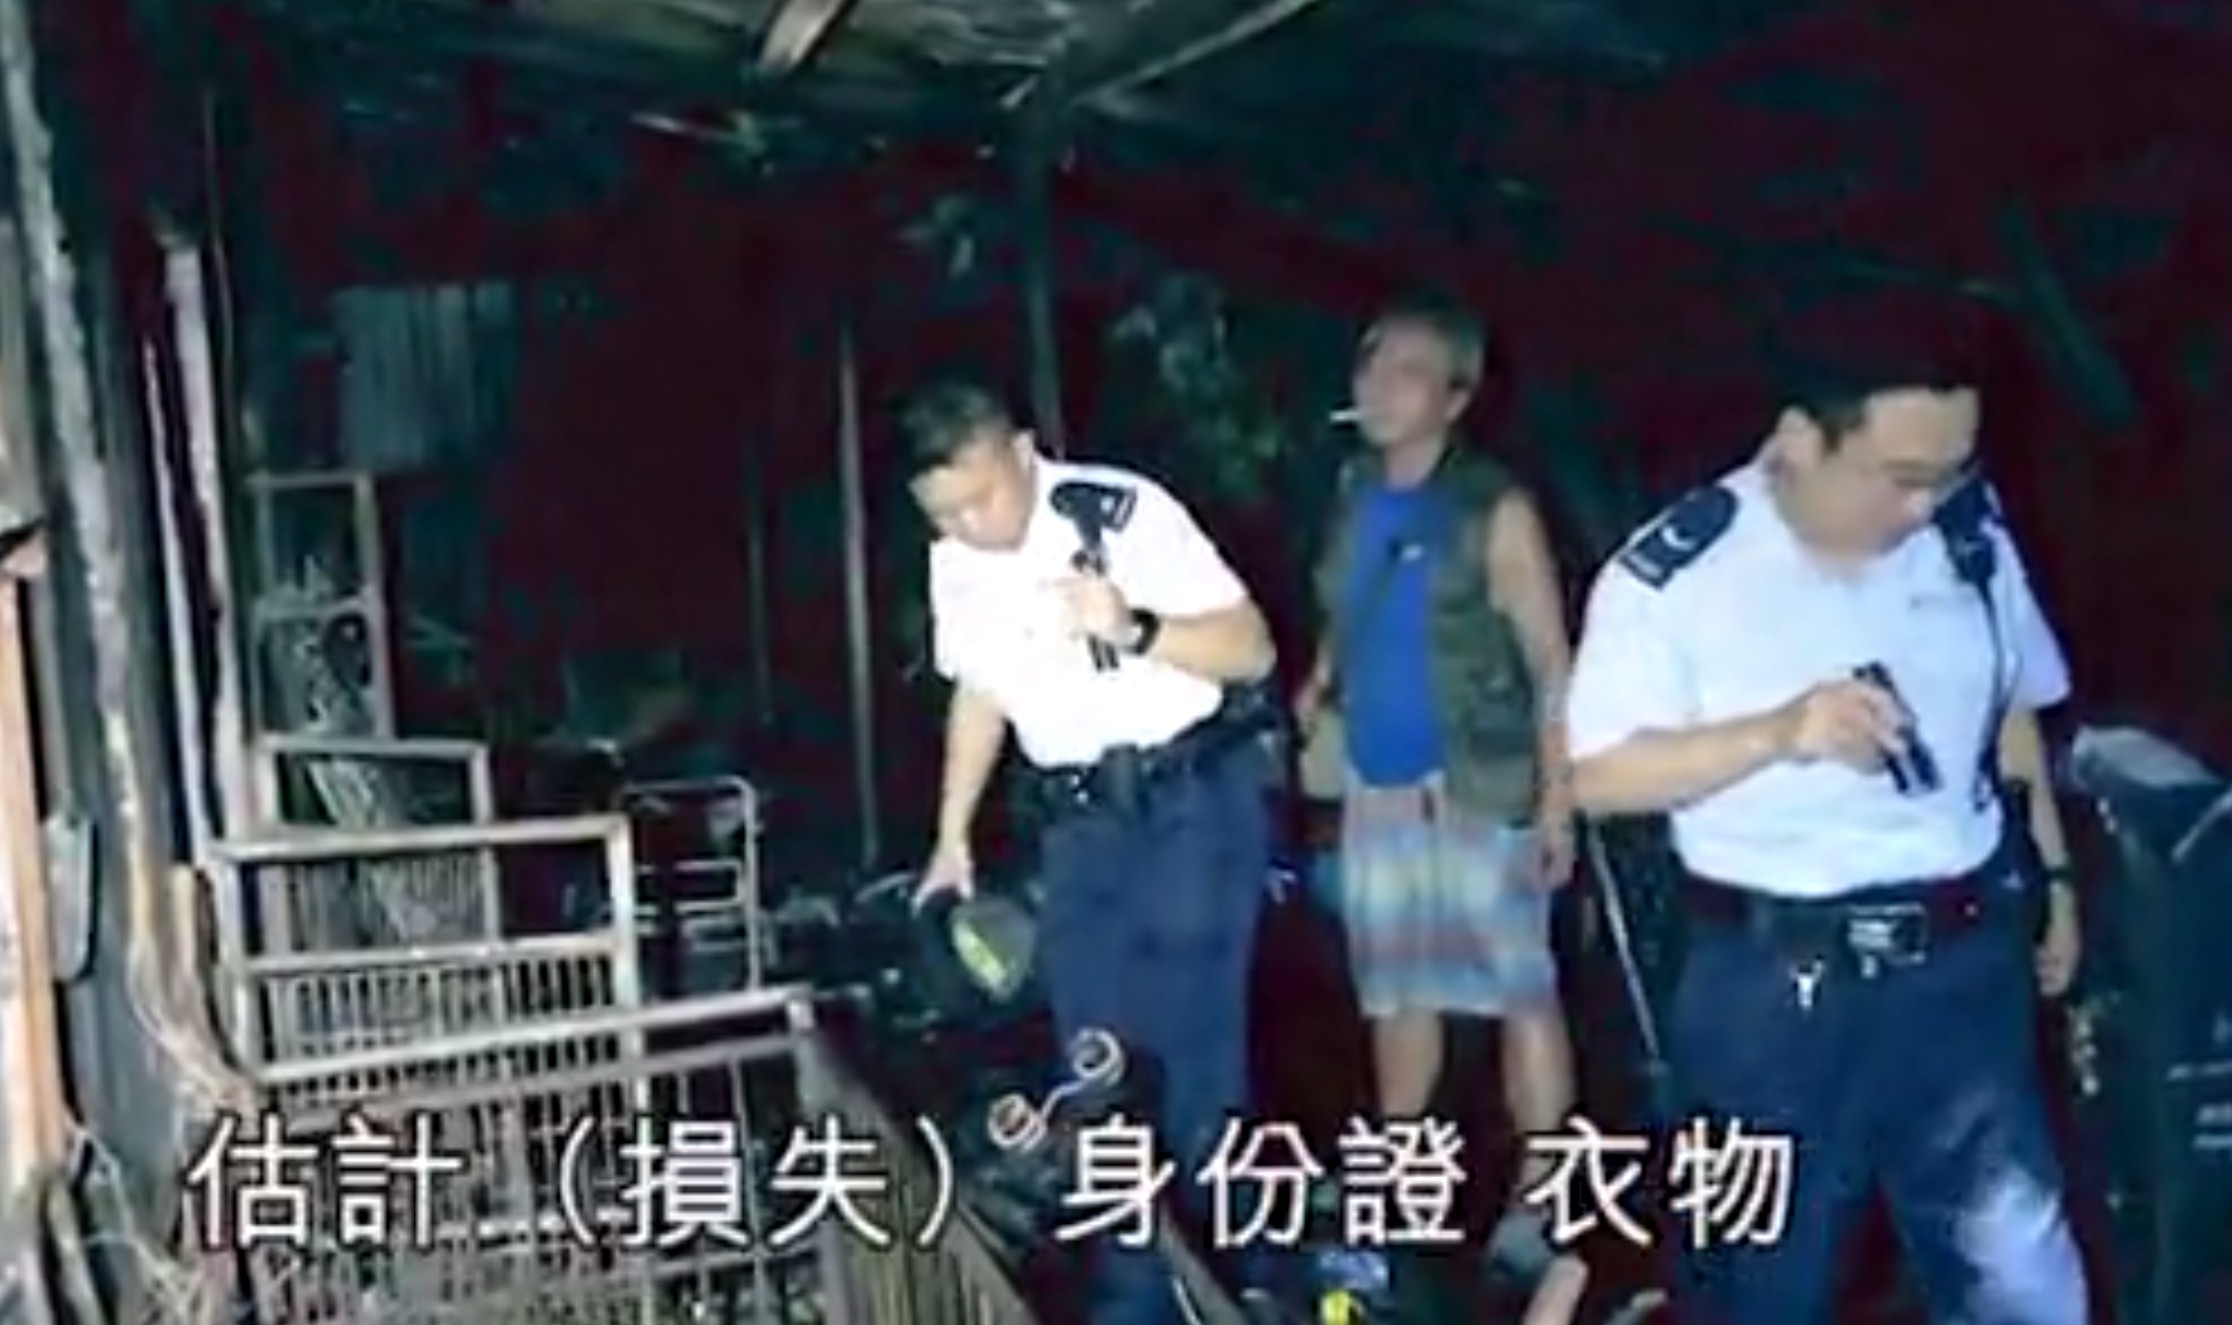 Authorities and the homeowner inspect the scene of a house fire in Tuen Mun believed to be caused by an exploding power bank that had been left to charge. Screengrab via Apple Daily.